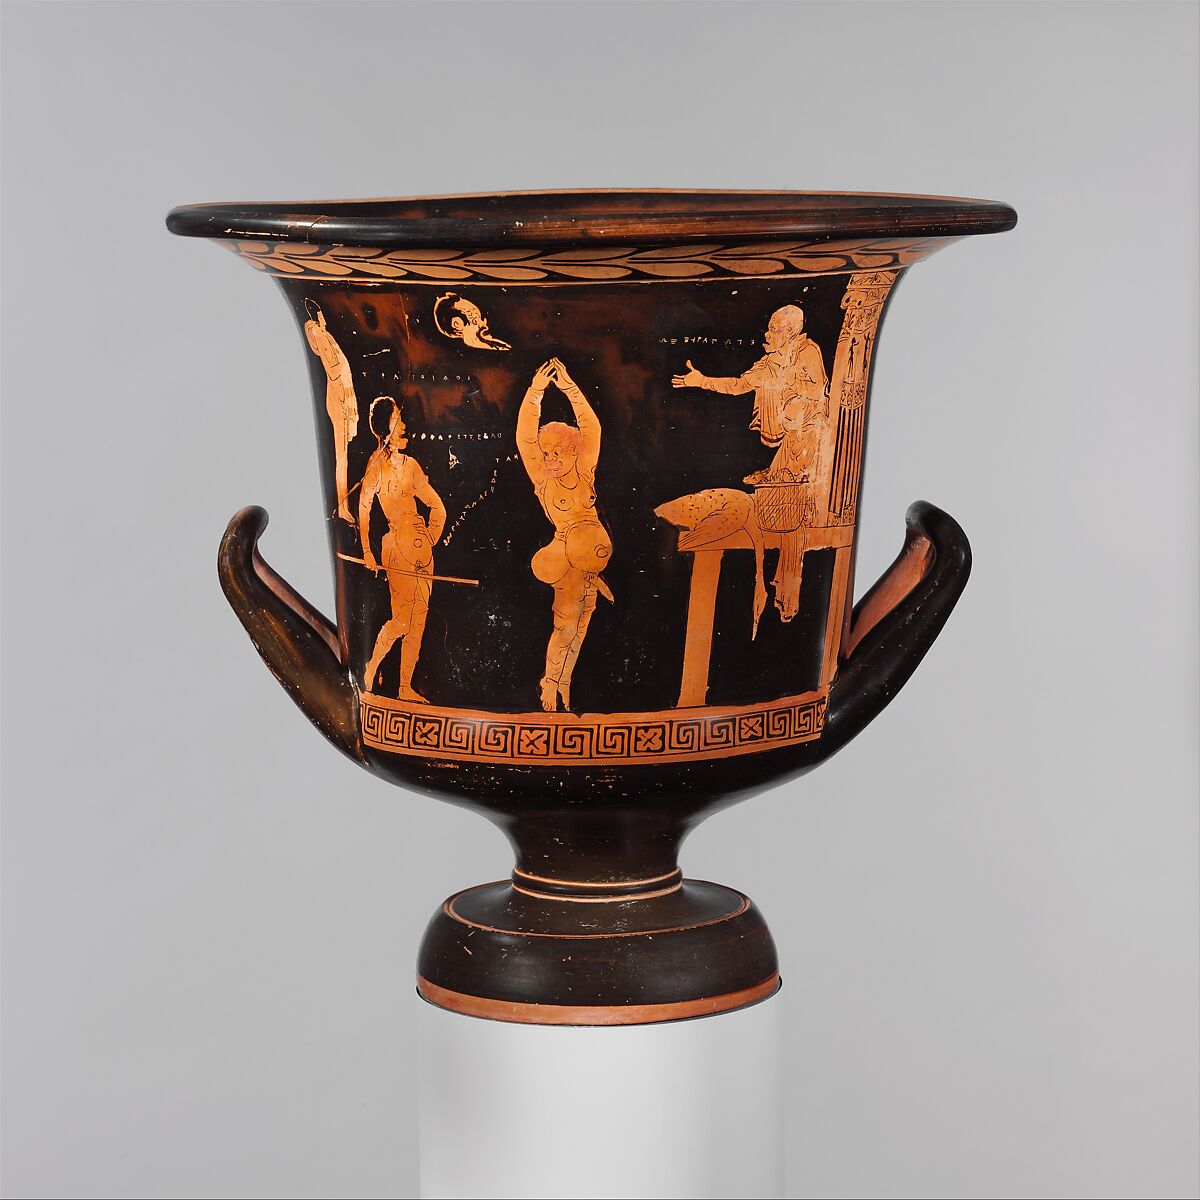 Terracotta calyx-krater (mixing bowl), Attributed to the Dolon Painter, Terracotta, Greek, South Italian, Lucanian 